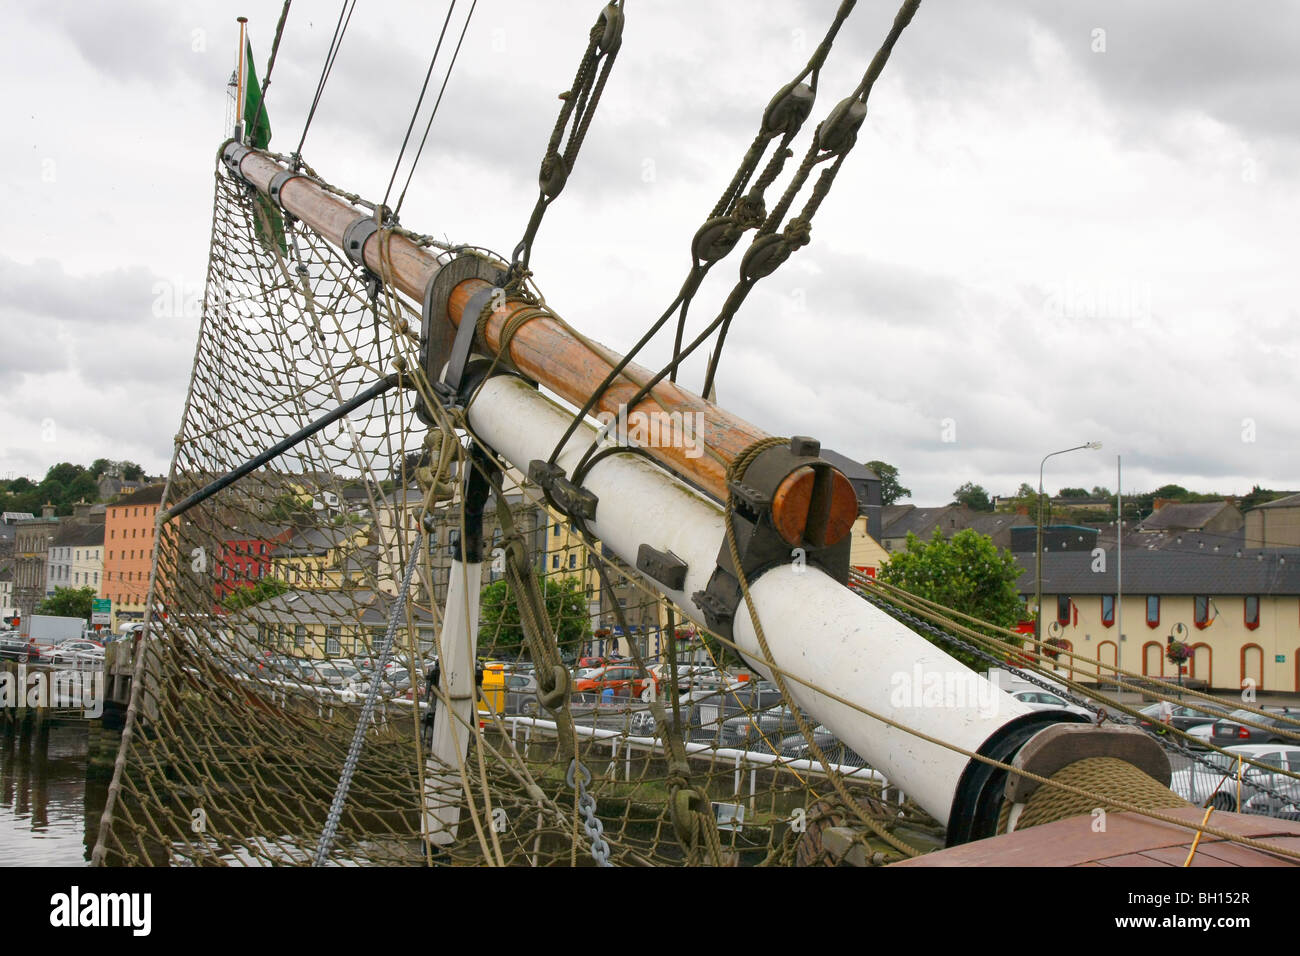 Bowspit des Schiffes Hungersnot Dunbody bei New Ross, Eire. Stockfoto